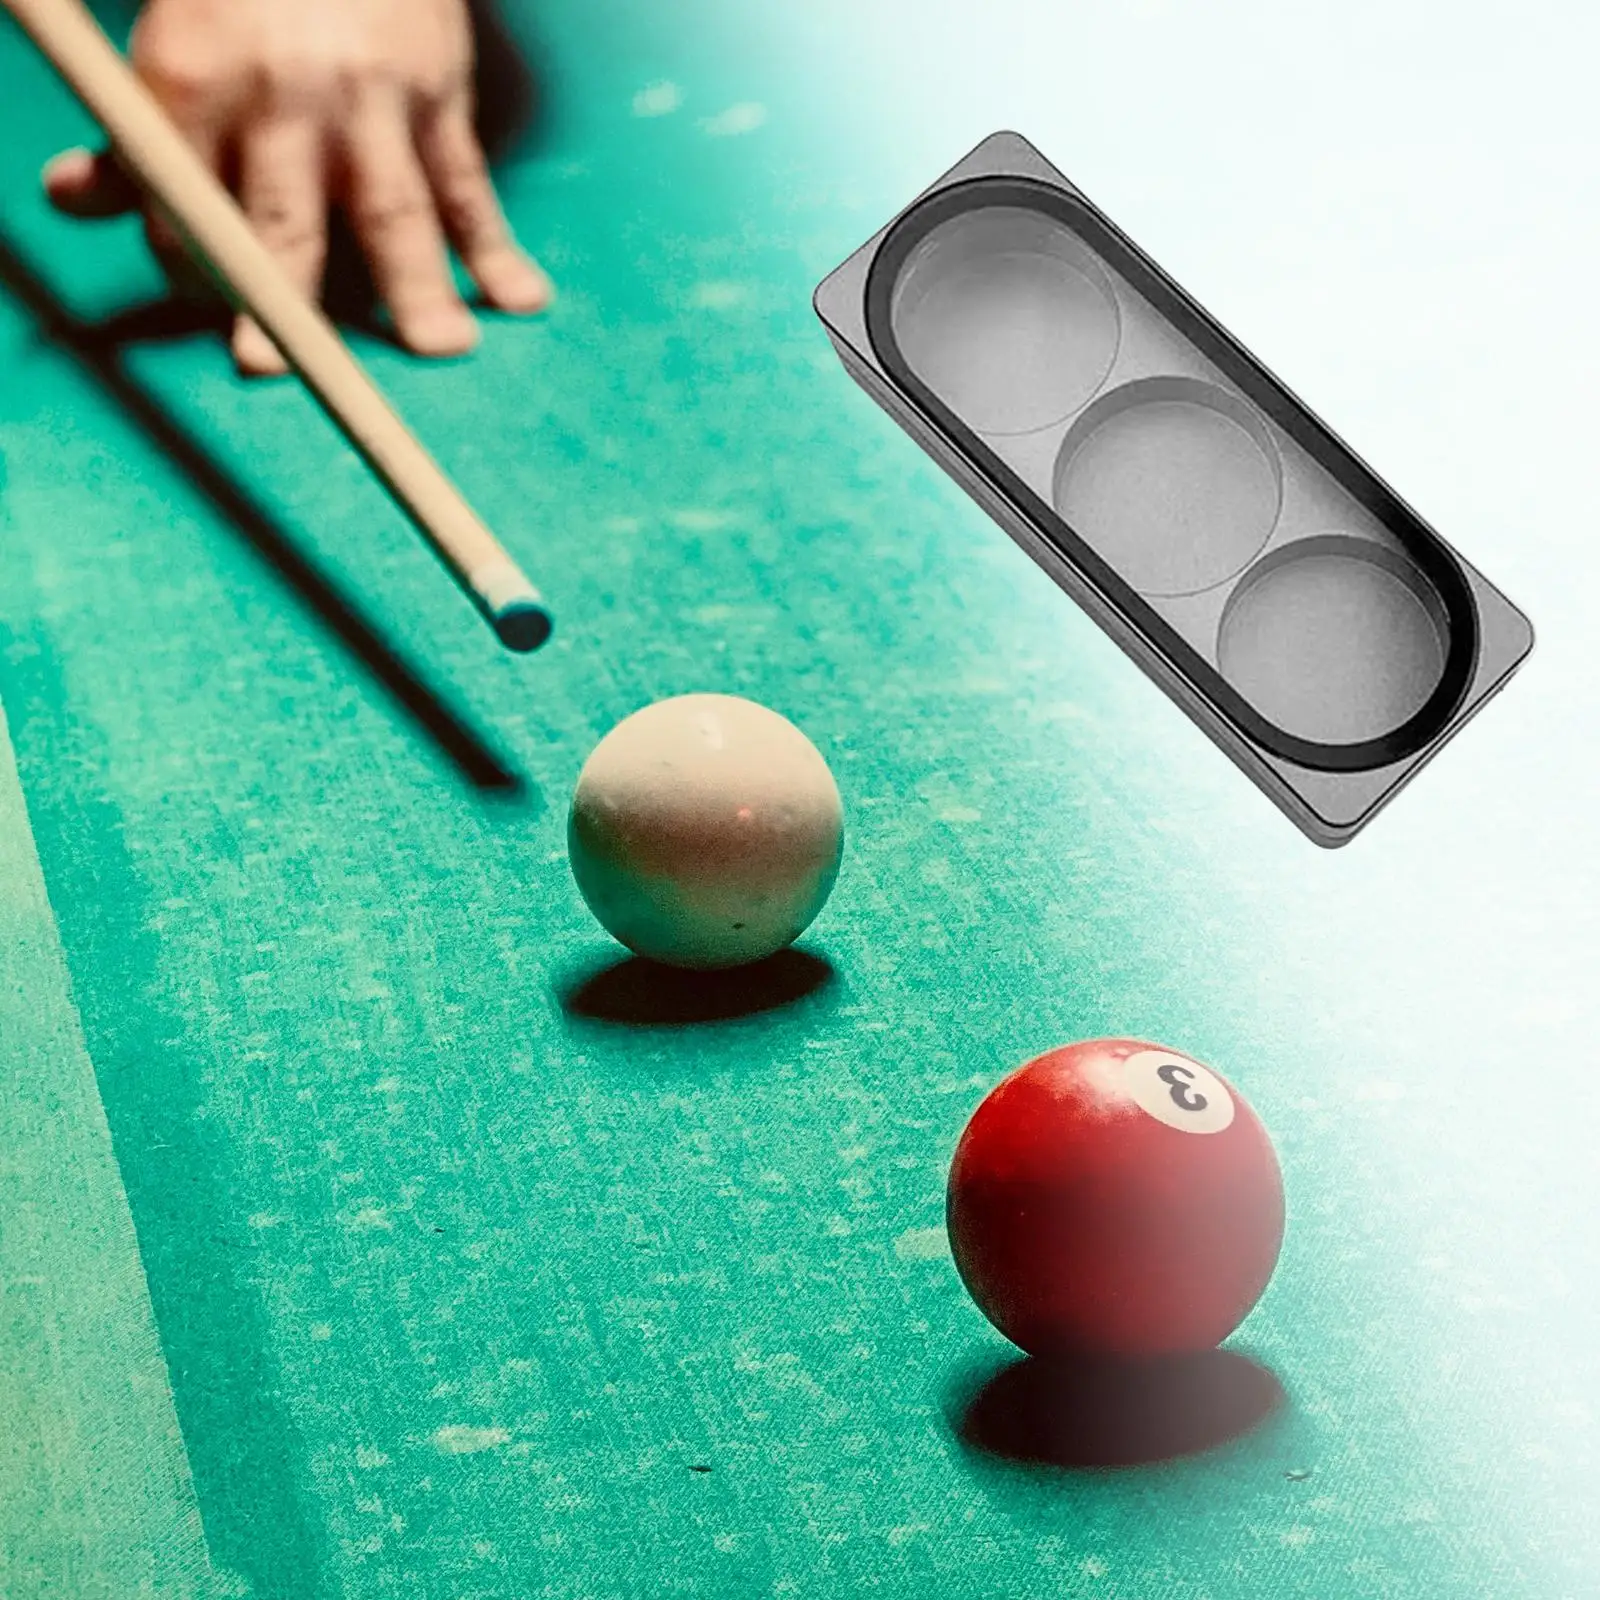 Aluminum Pool Tip Storage Case Chalks Carrier for Billiards Players Portable